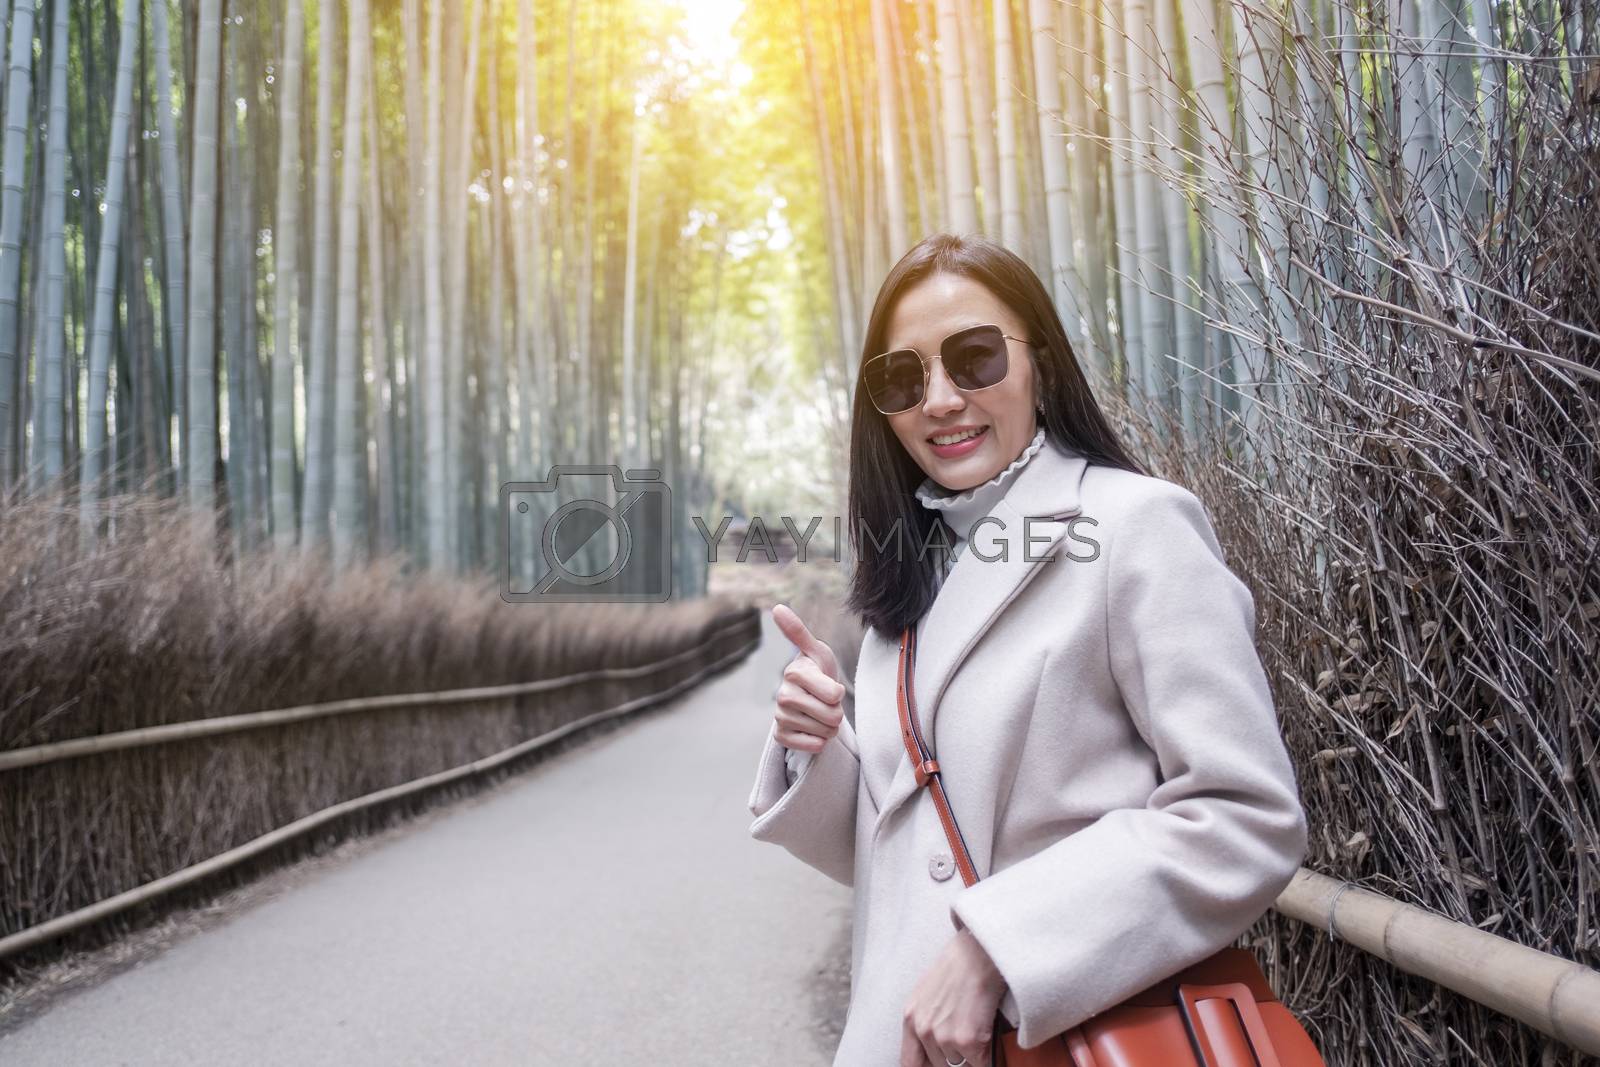 Royalty free image of  Asian woman traveling at Bamboo Forest in Kyoto, Japan.  by Surasak